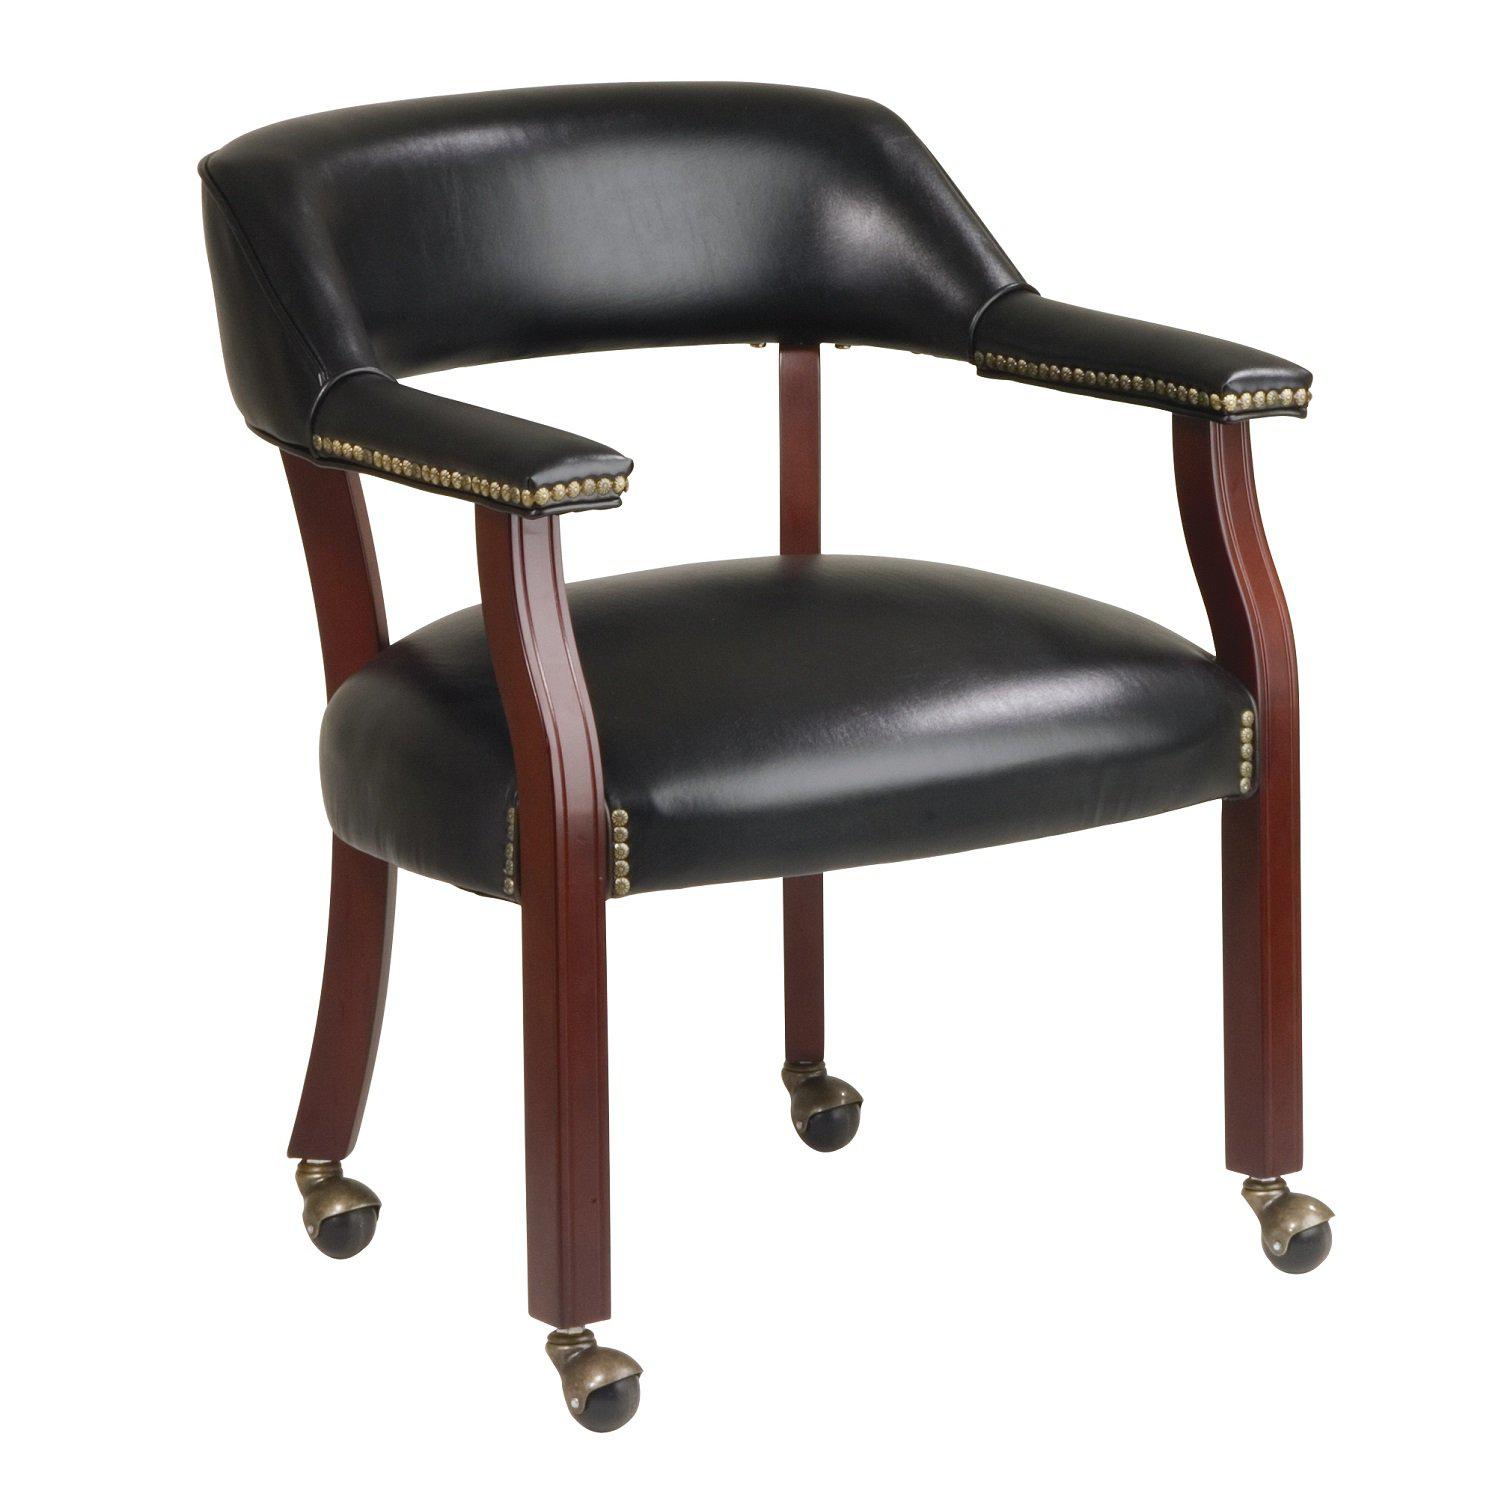 Traditional Guest Chair with Wrap Around Back and casters, Black Vinyl Upholstery